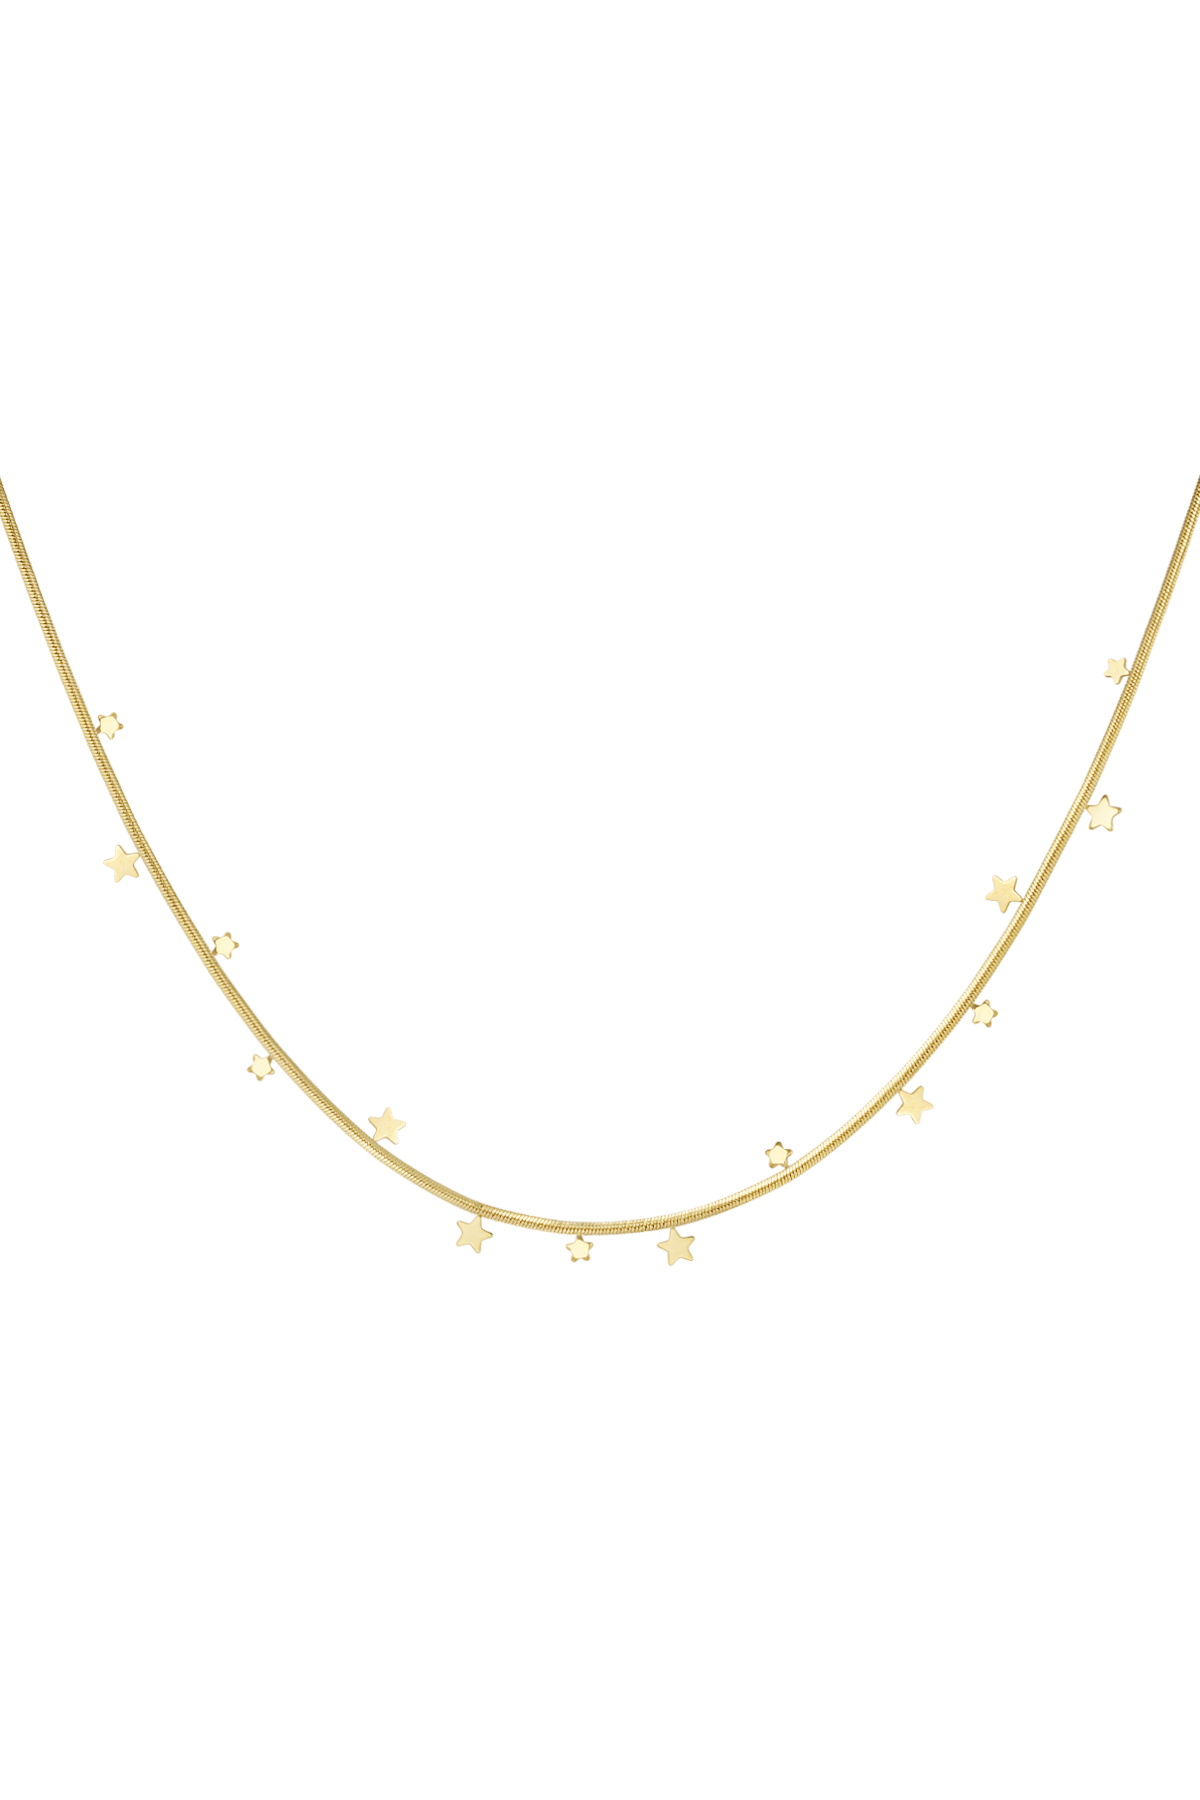 Necklace hanging stars - gold h5 